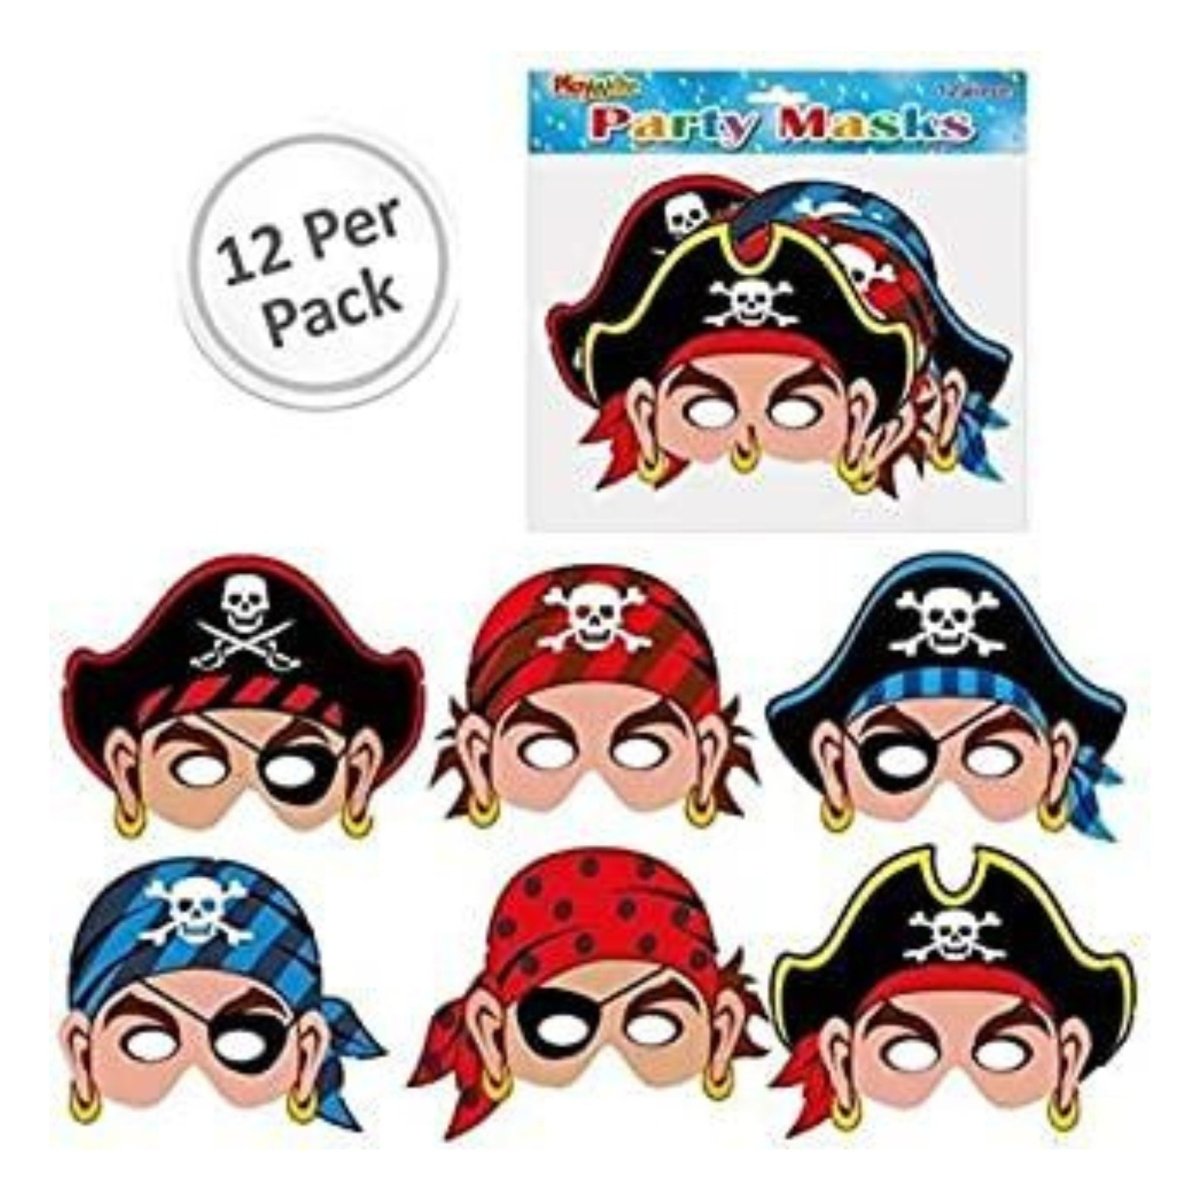 Pirate Masks 12 Pack - Kids Party Craft